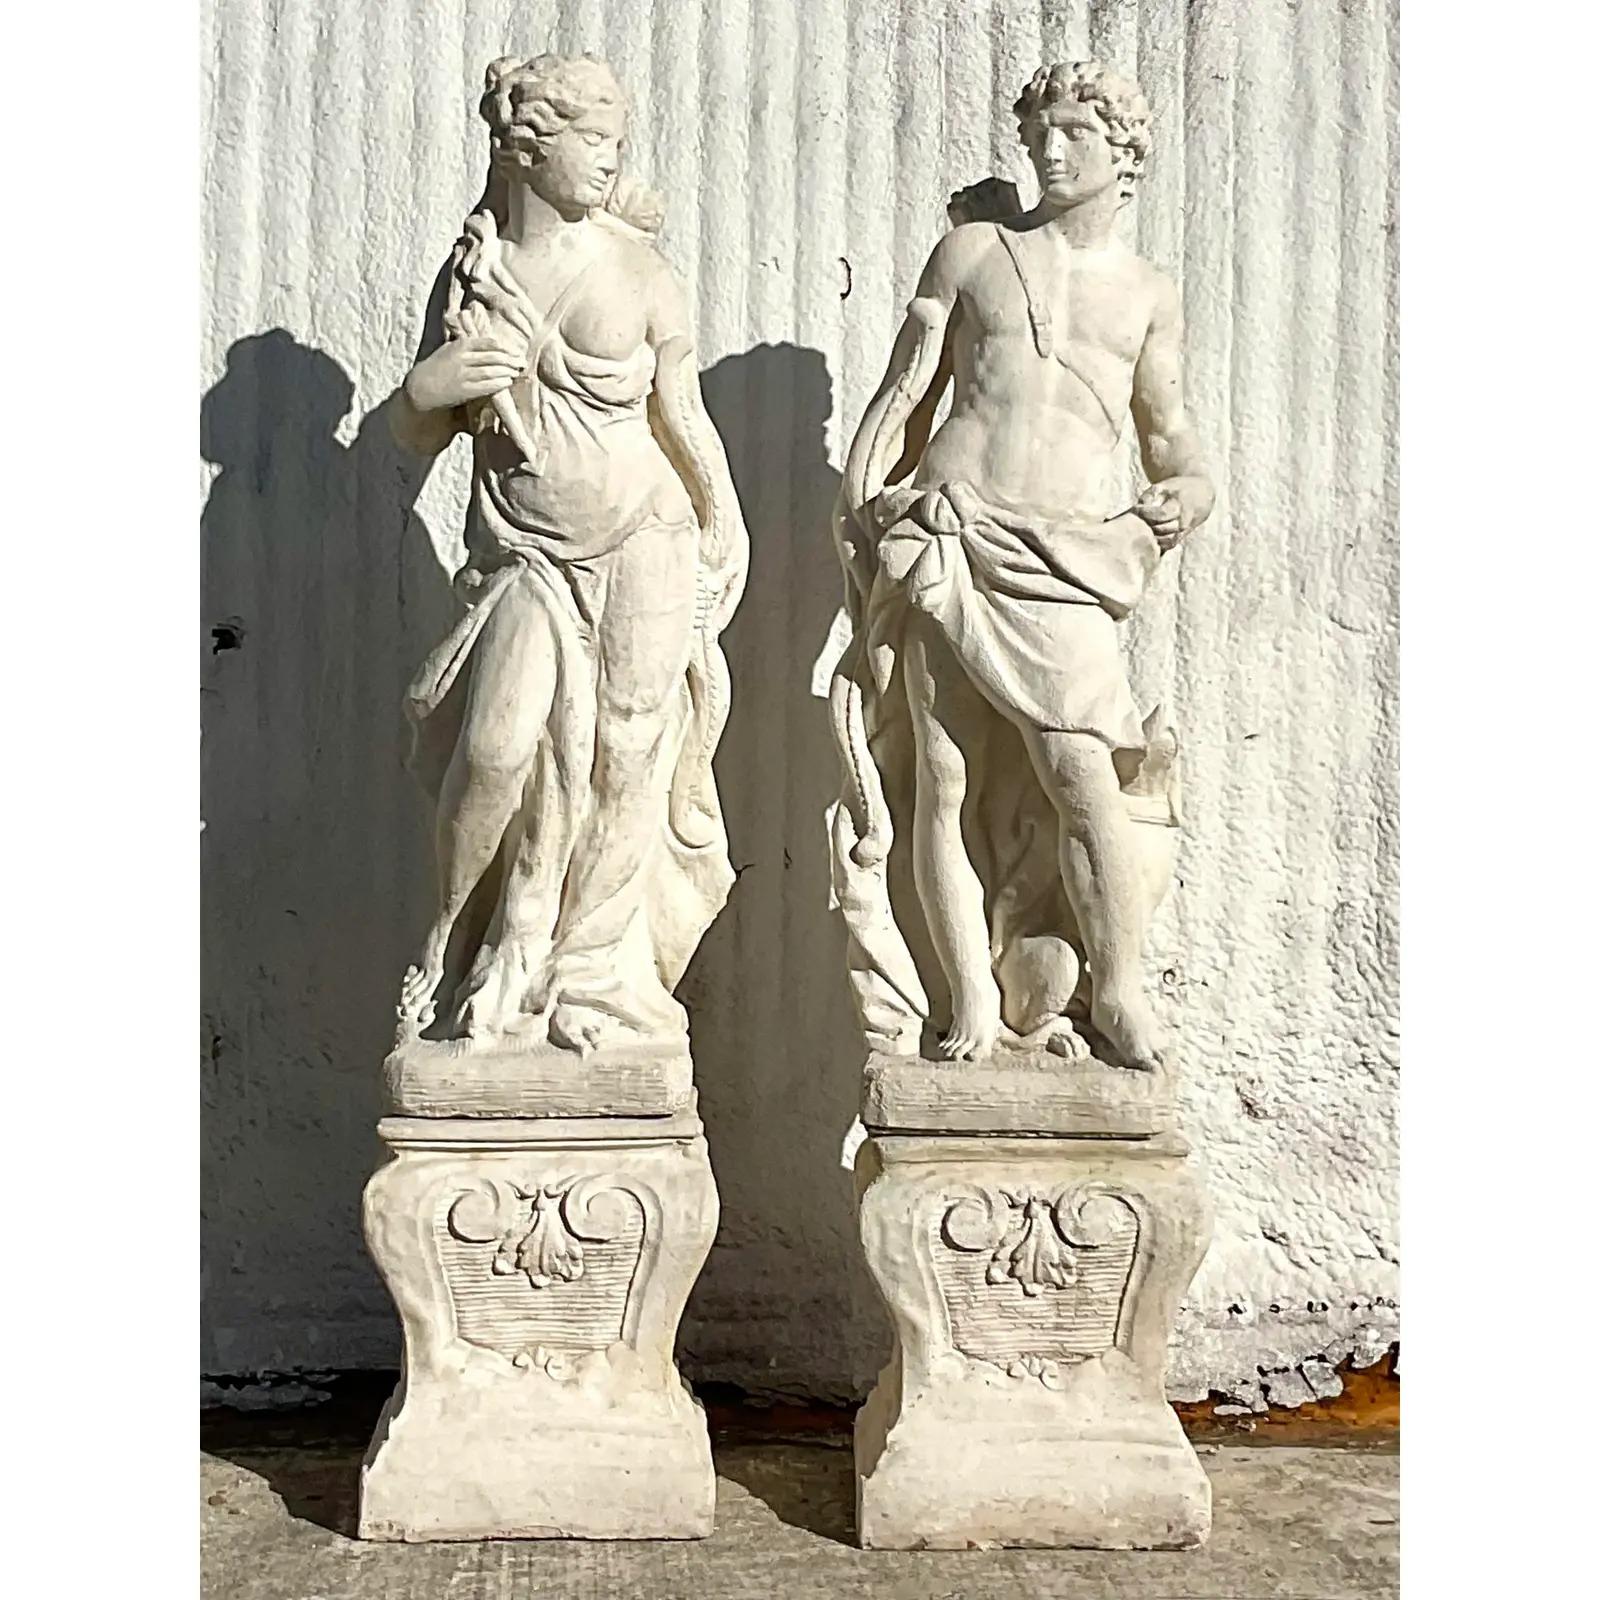 A spectacular pair of vintage Regency statues. A chic pair of mythological figure done in a cast stone. Each rests on a detailed plinth. Perfect indoors or outside. Acquired from a Palm Beach estate.